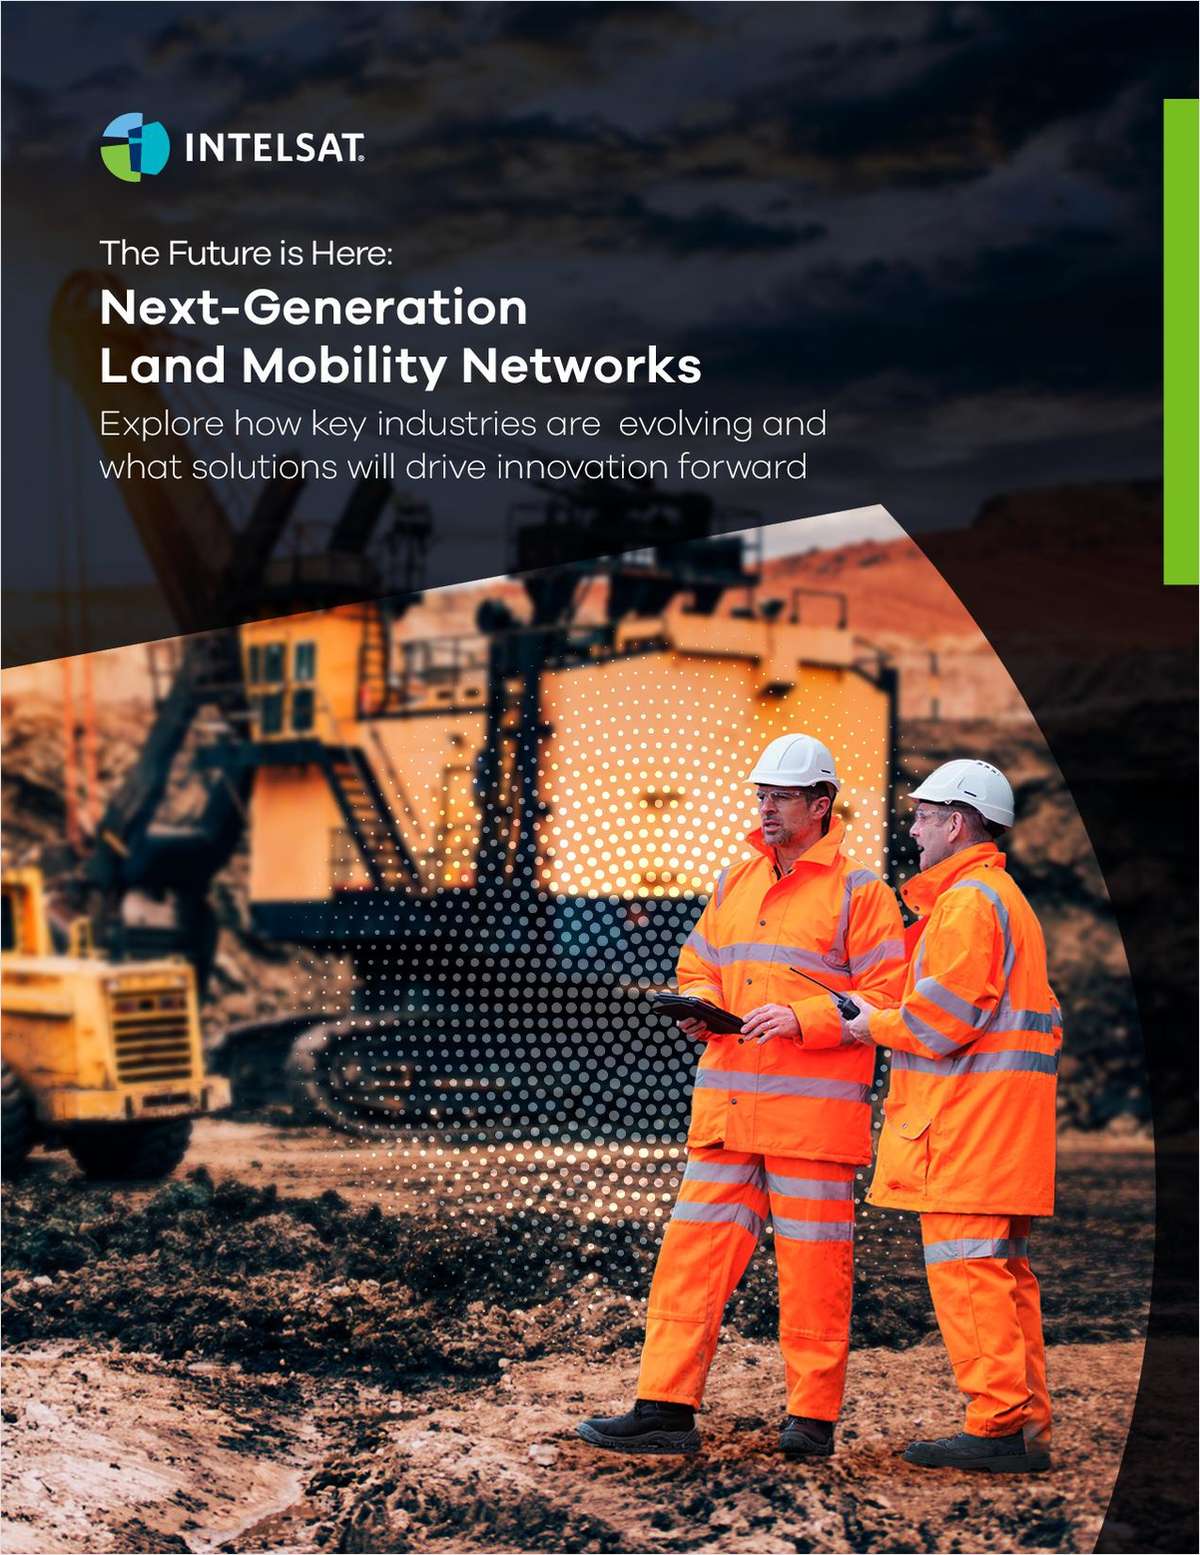 The Future is Here: Next-Generation Land Mobility Networks